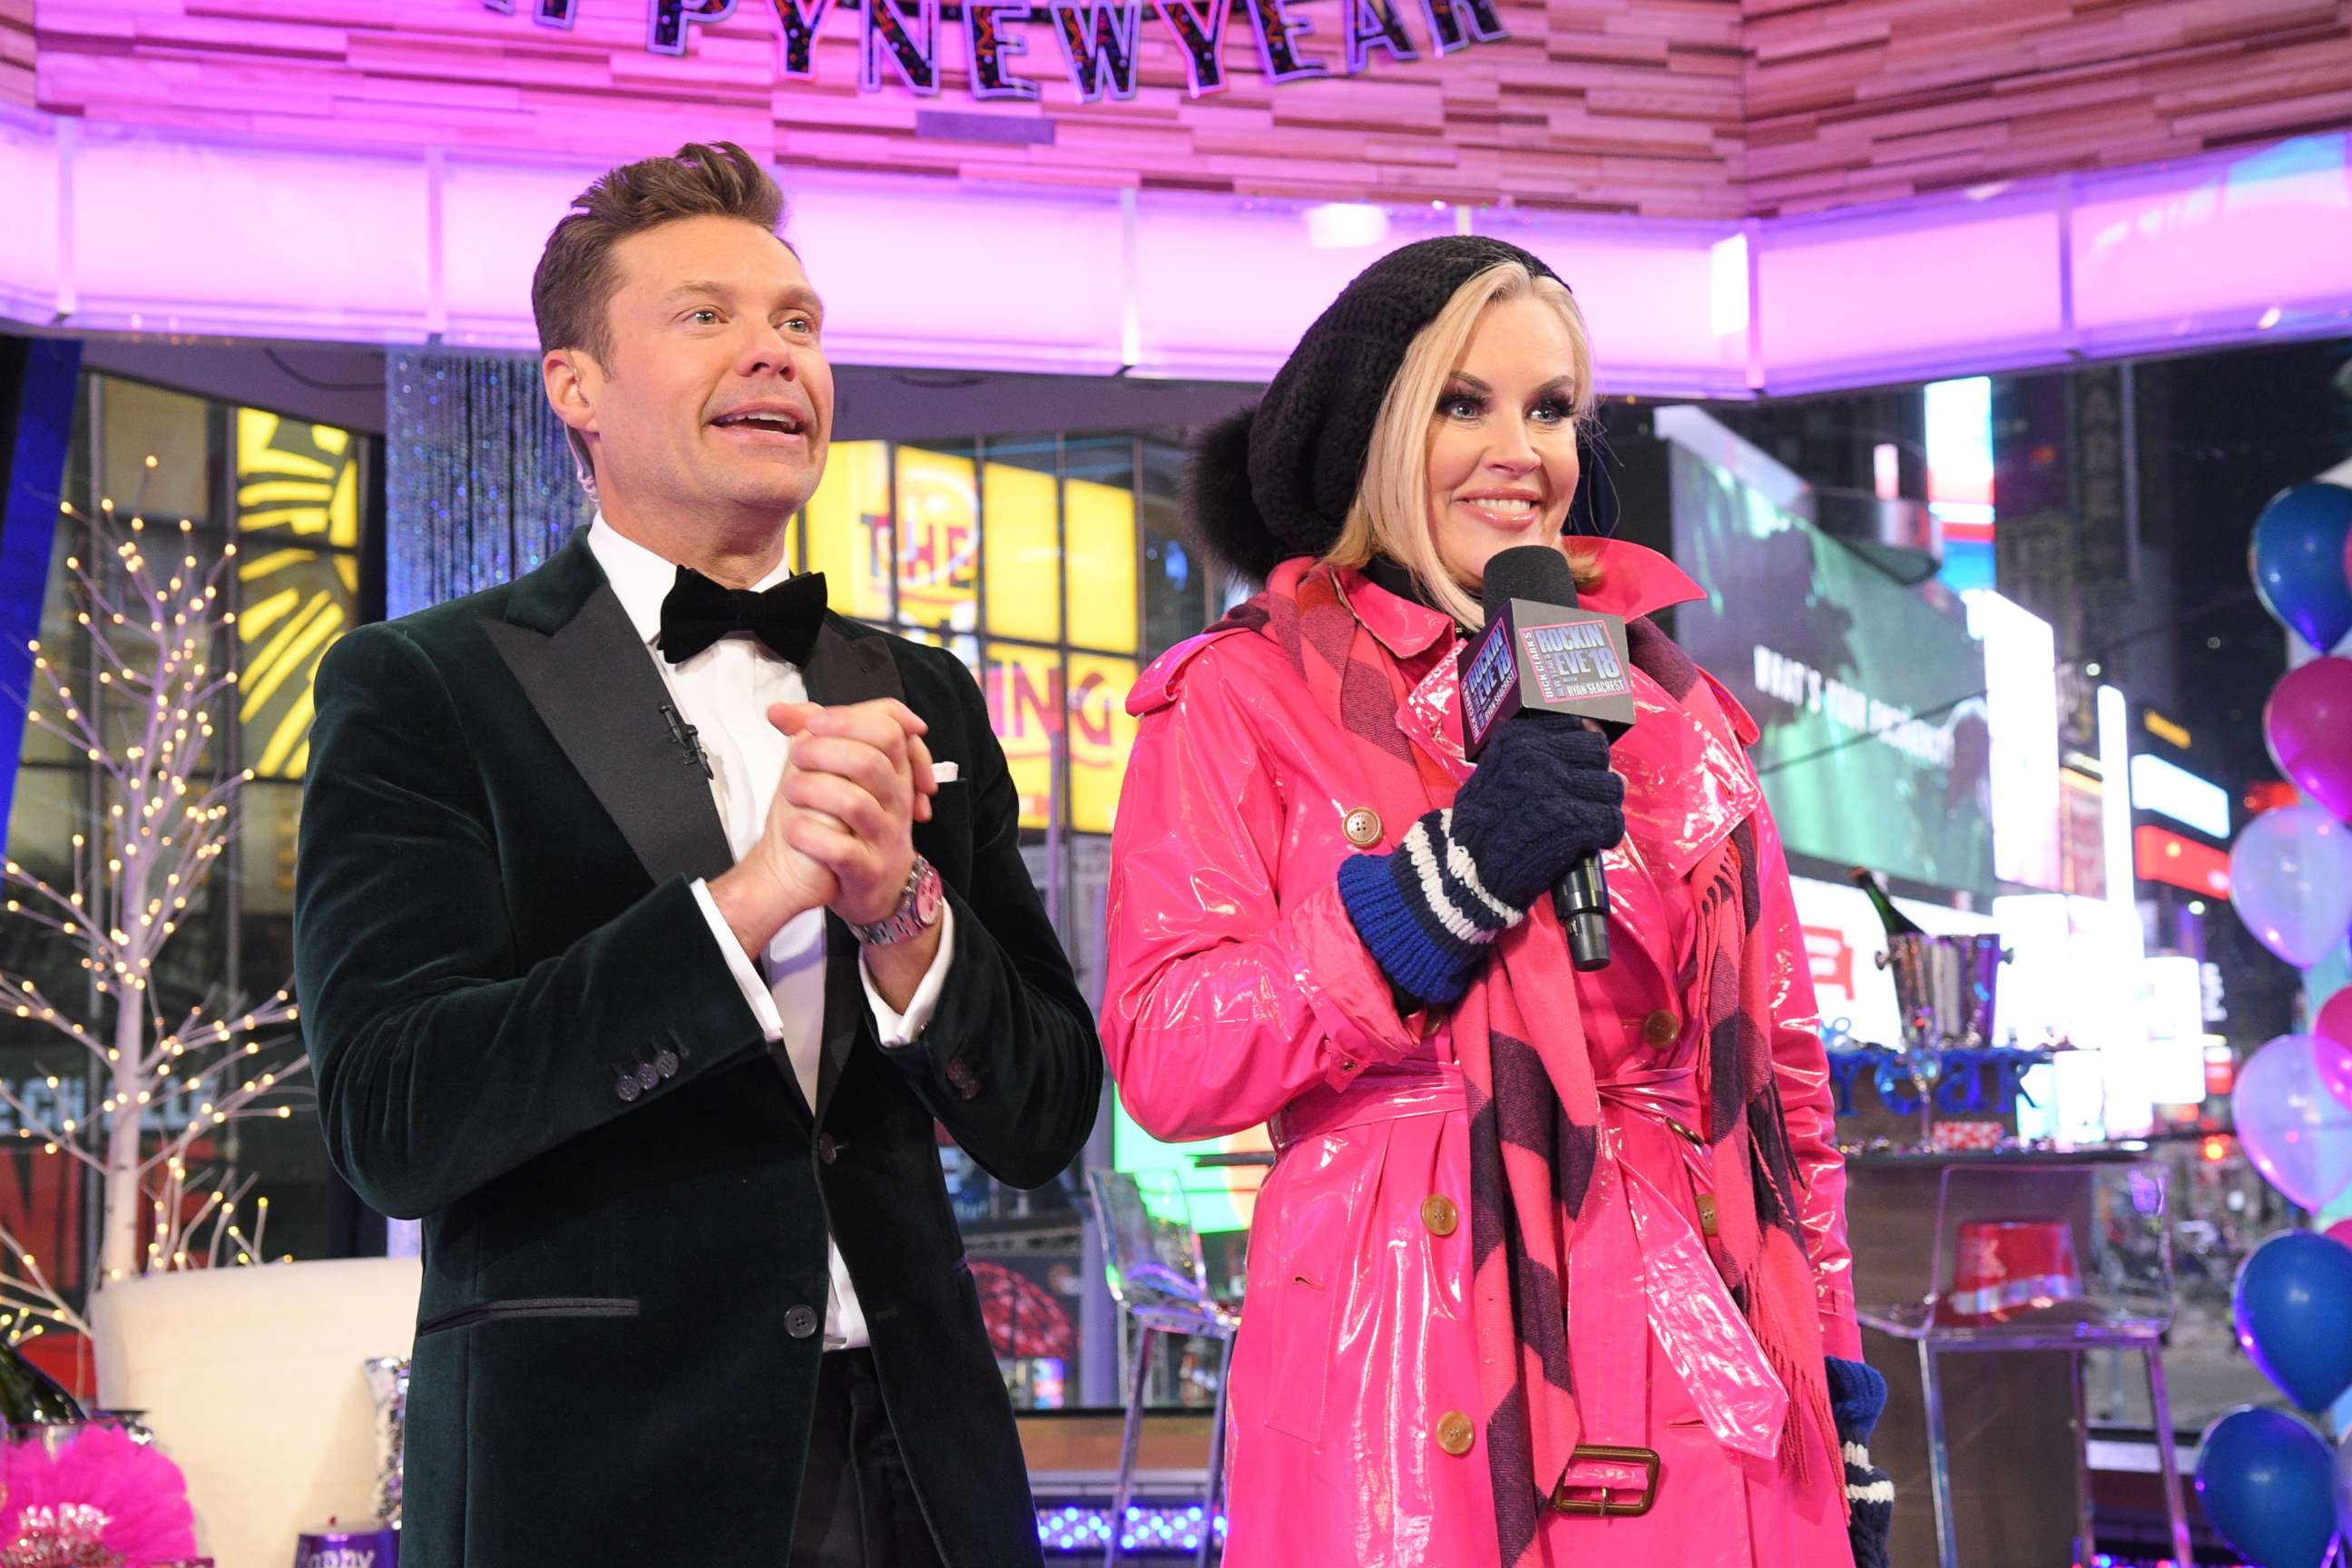 PHOTO: Ryan Seacrest and Jenny McCarthy host "Dick Clark's New Year's Rockin Eve" on ABC during the 2018 New Year.